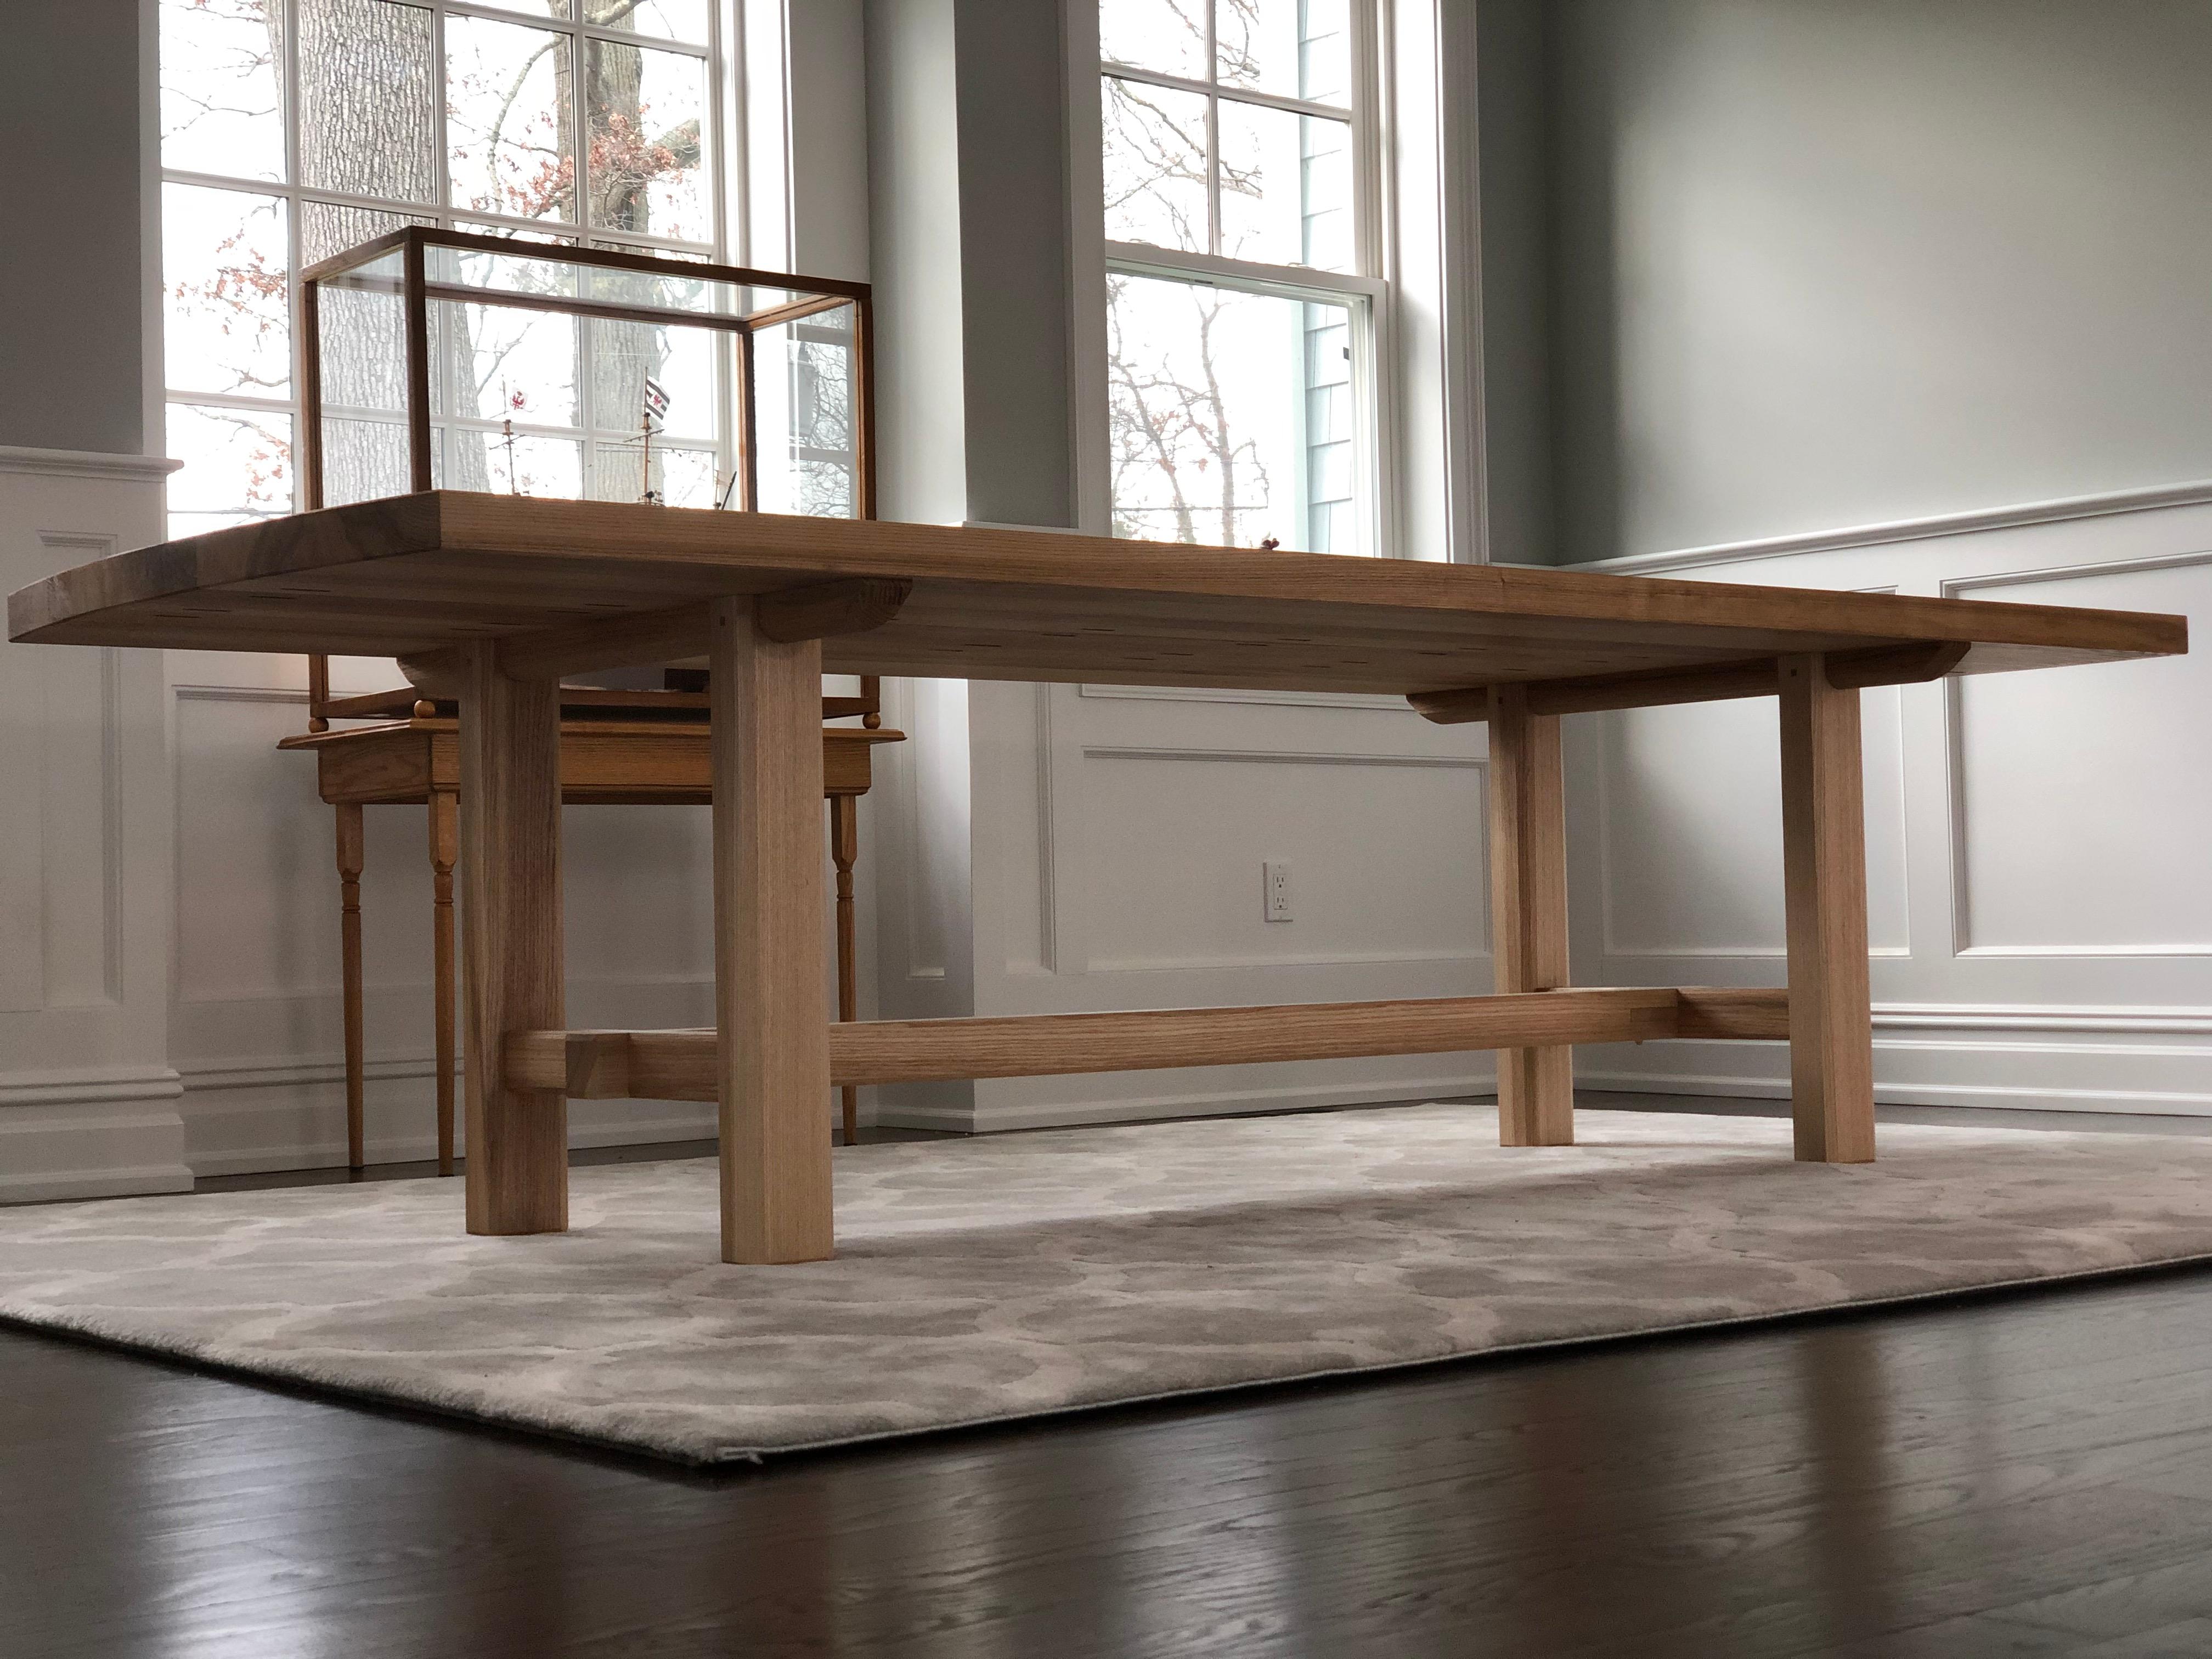 This handmade heavy slab trestle leg dining table features elements unique to traditional Japanese timber framing carpentry work making this a subtle and very sturdy dining table. This table features a heavy slab of quarter sawn white ash, supported